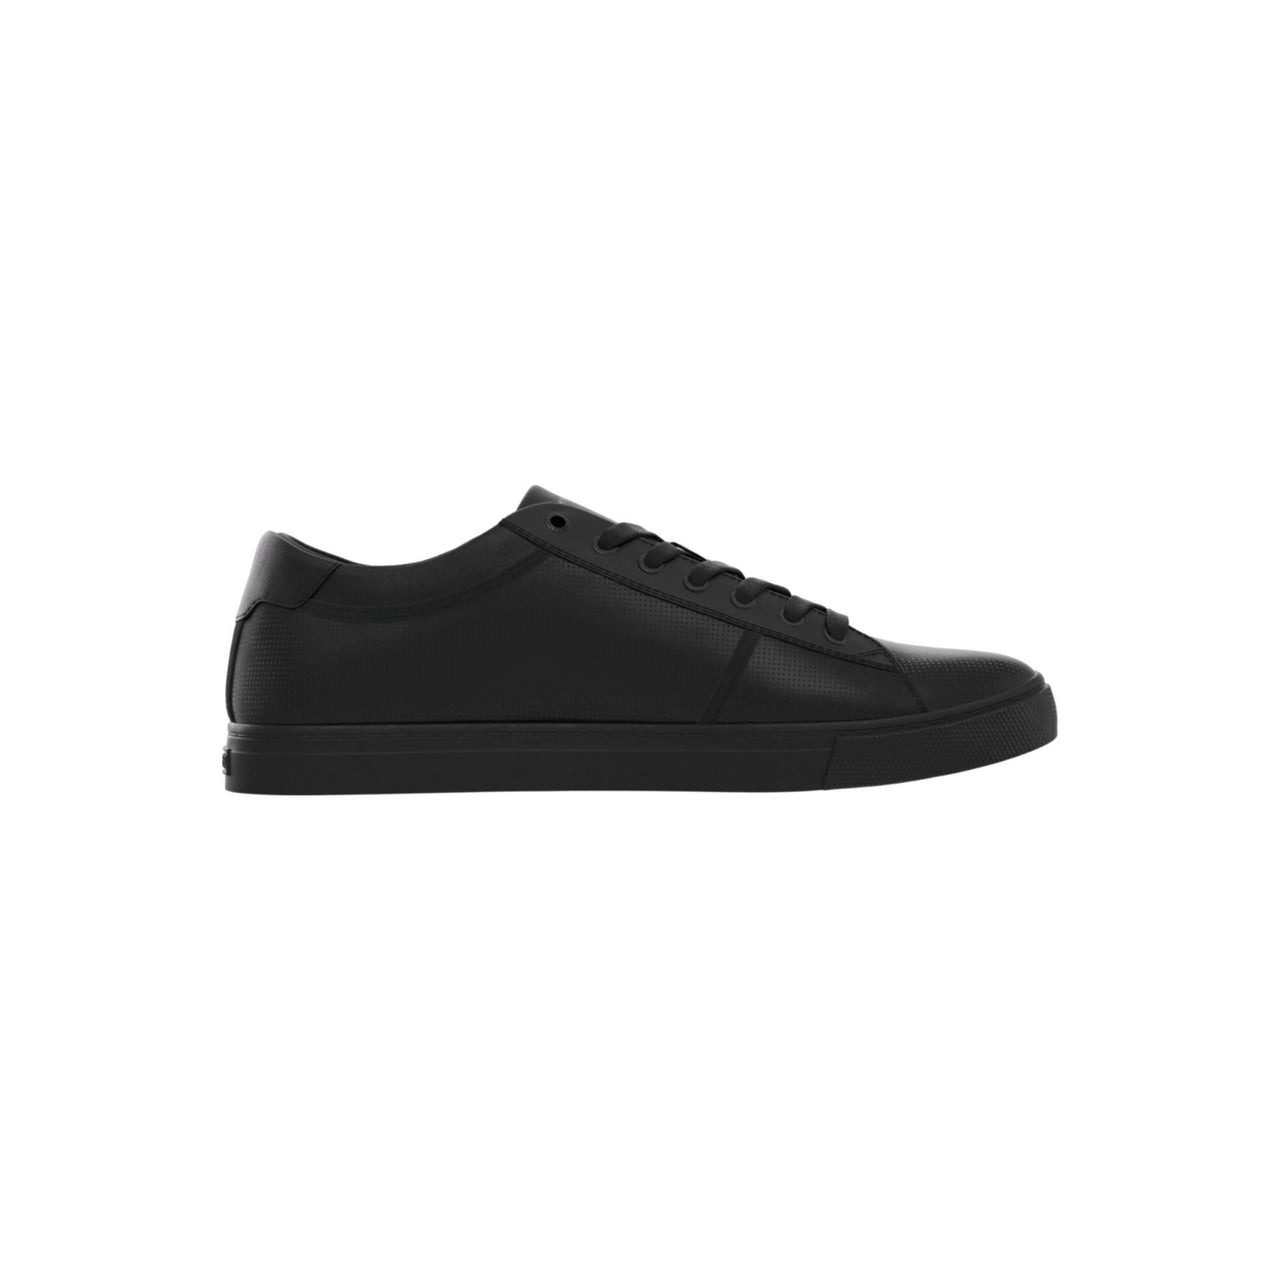 Zapatillas Tommy Hilfiger Hombre Iconic Leather Vulc Punched - Medina Menswear®